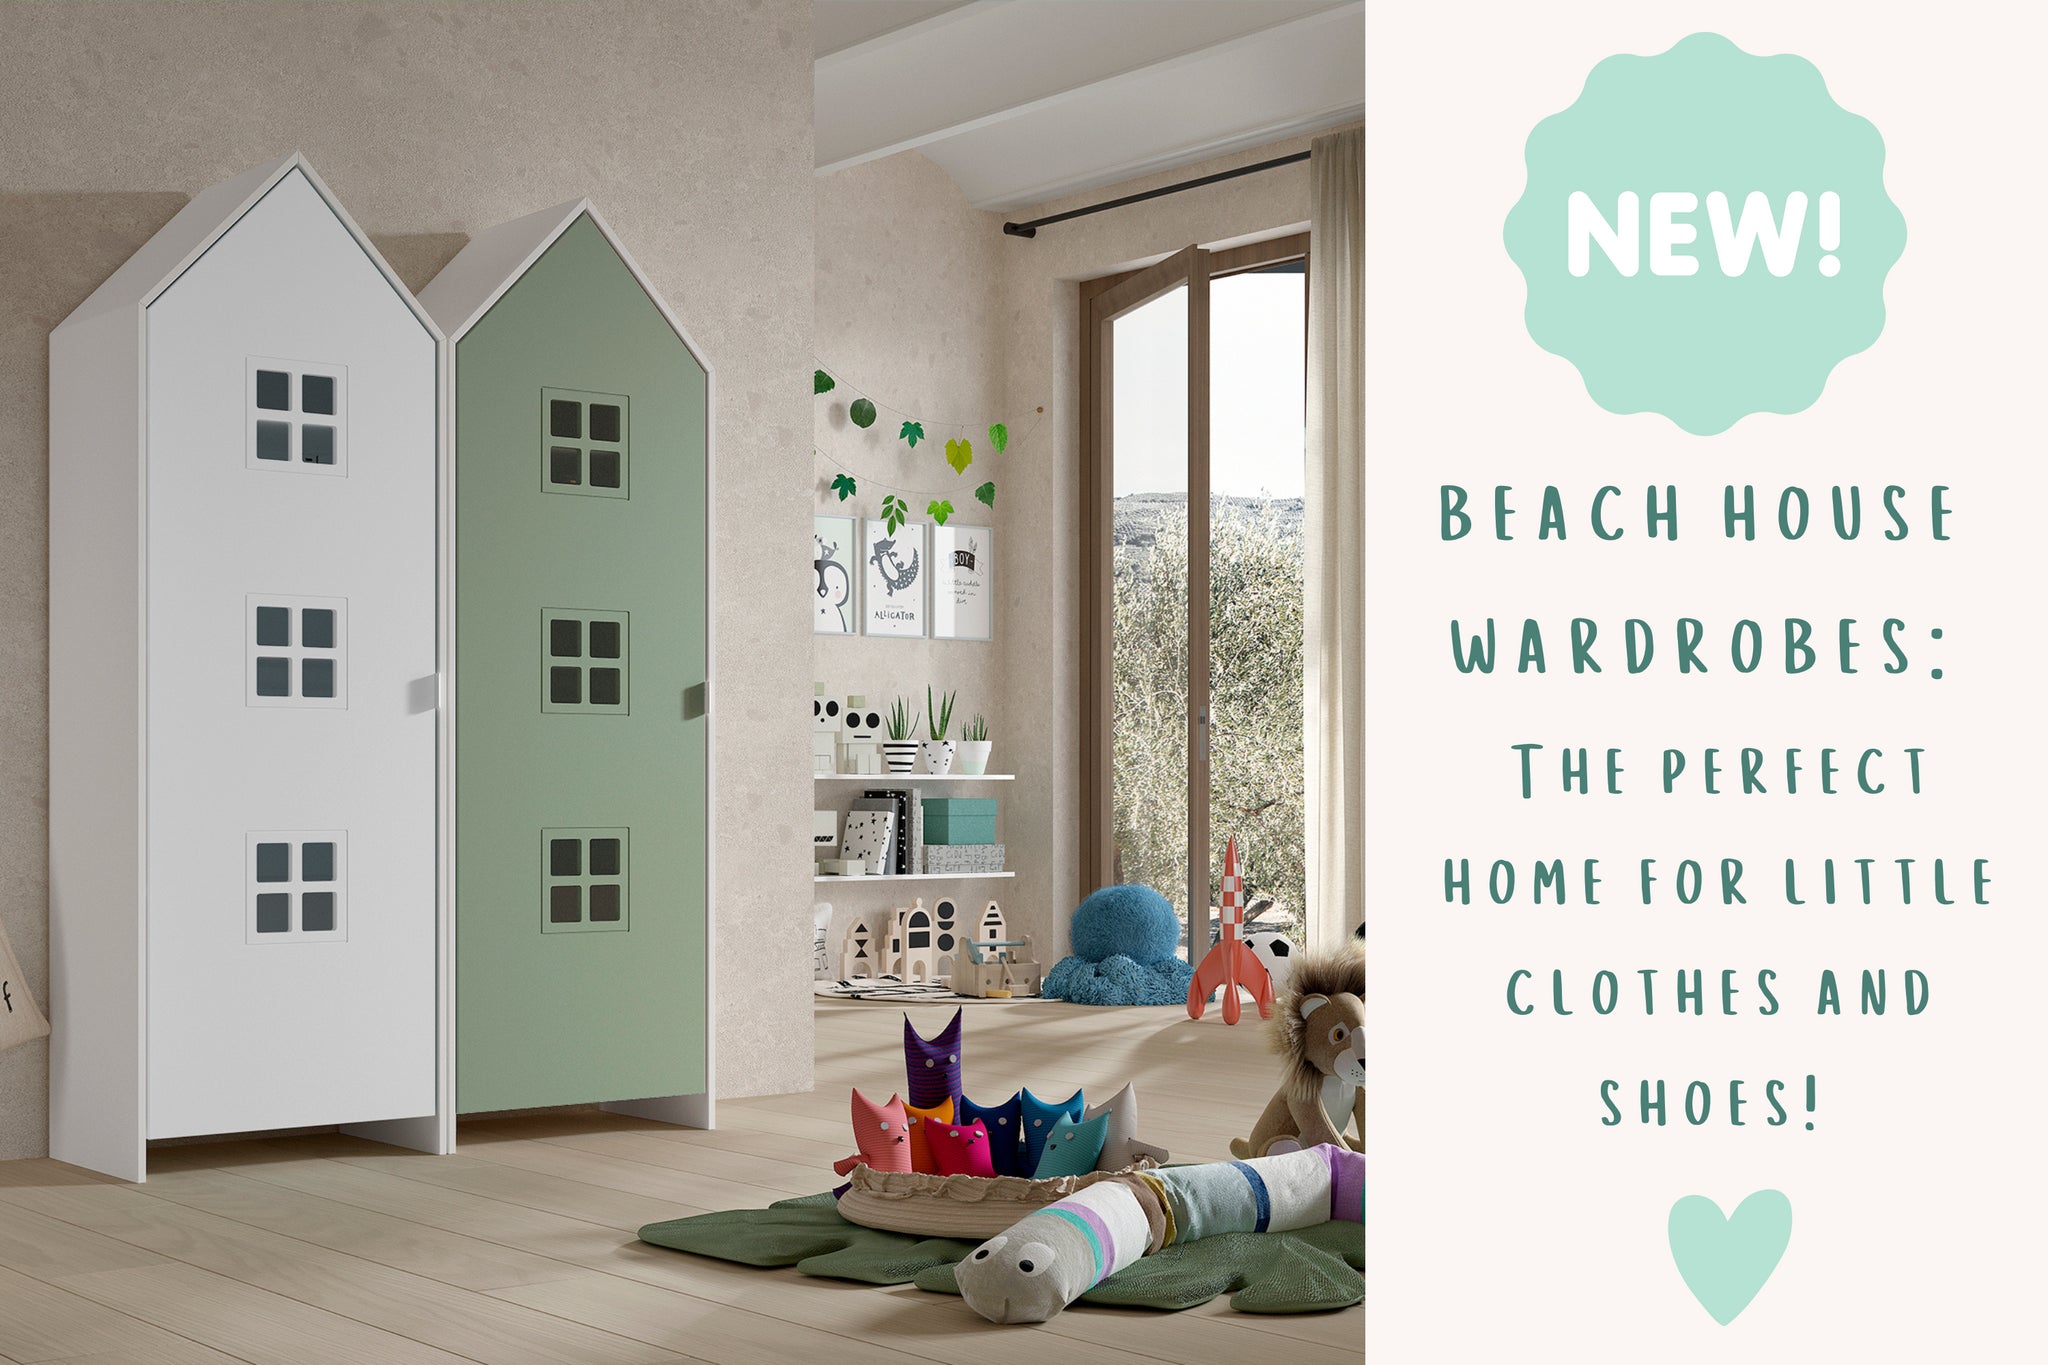 SPRING IS HERE! WELCOME TO OUR WORLD OF COLOURFUL TOYS AND HOME ACCESSORIES FOR CHILDREN.